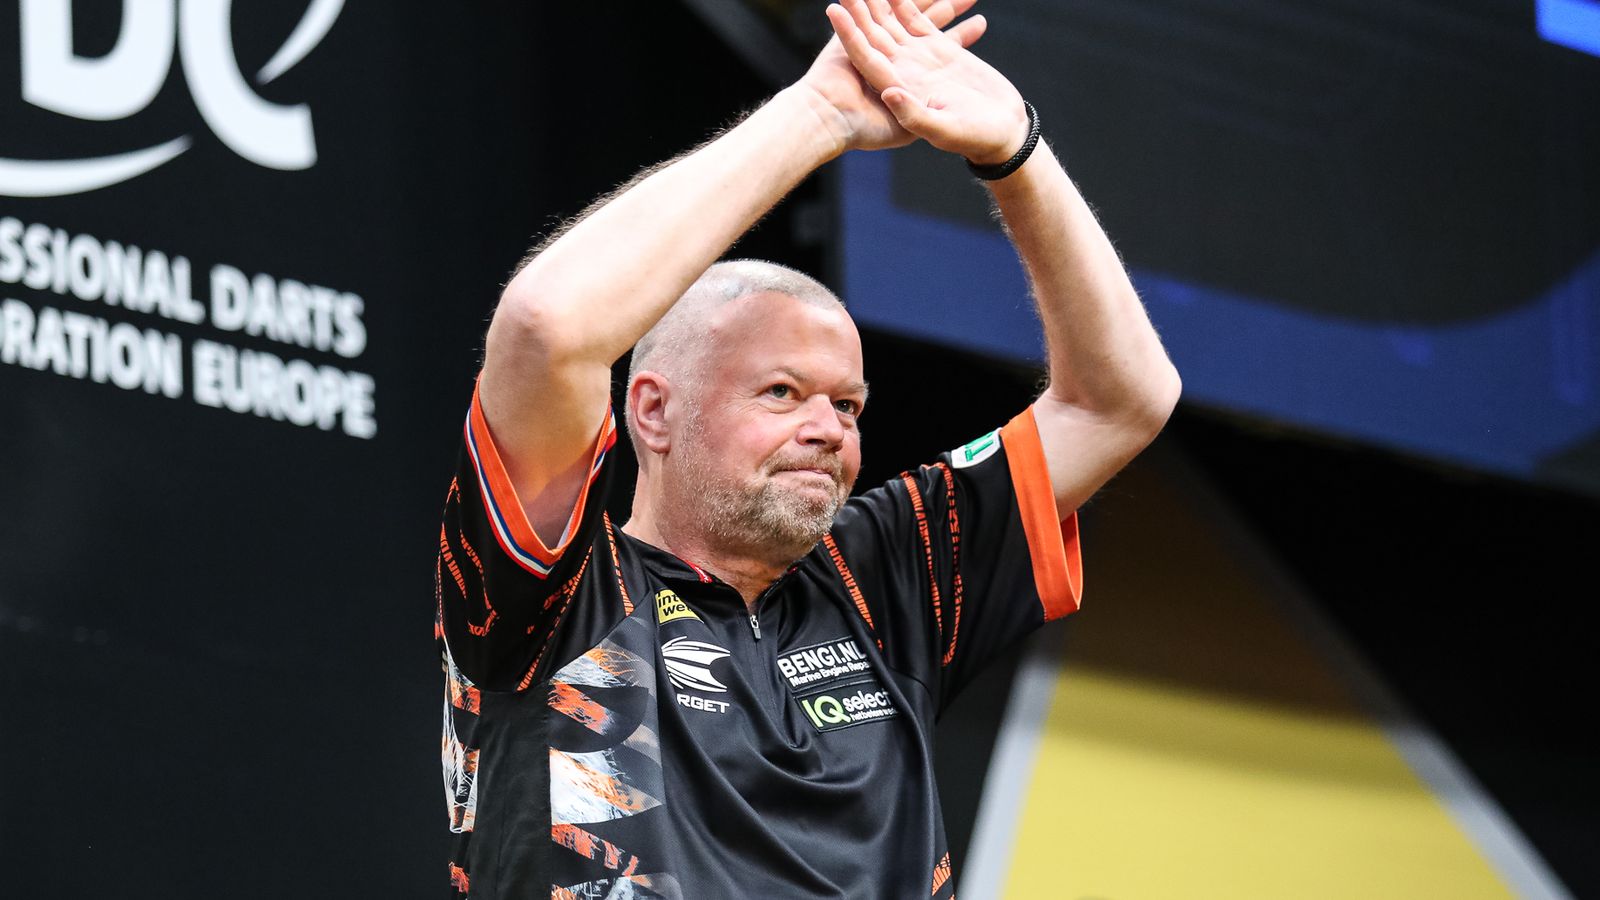 Darts Information: Raymond van Barneveld causes upset by defeating Michael Smith at World Sequence of Darts finals in Amsterdam